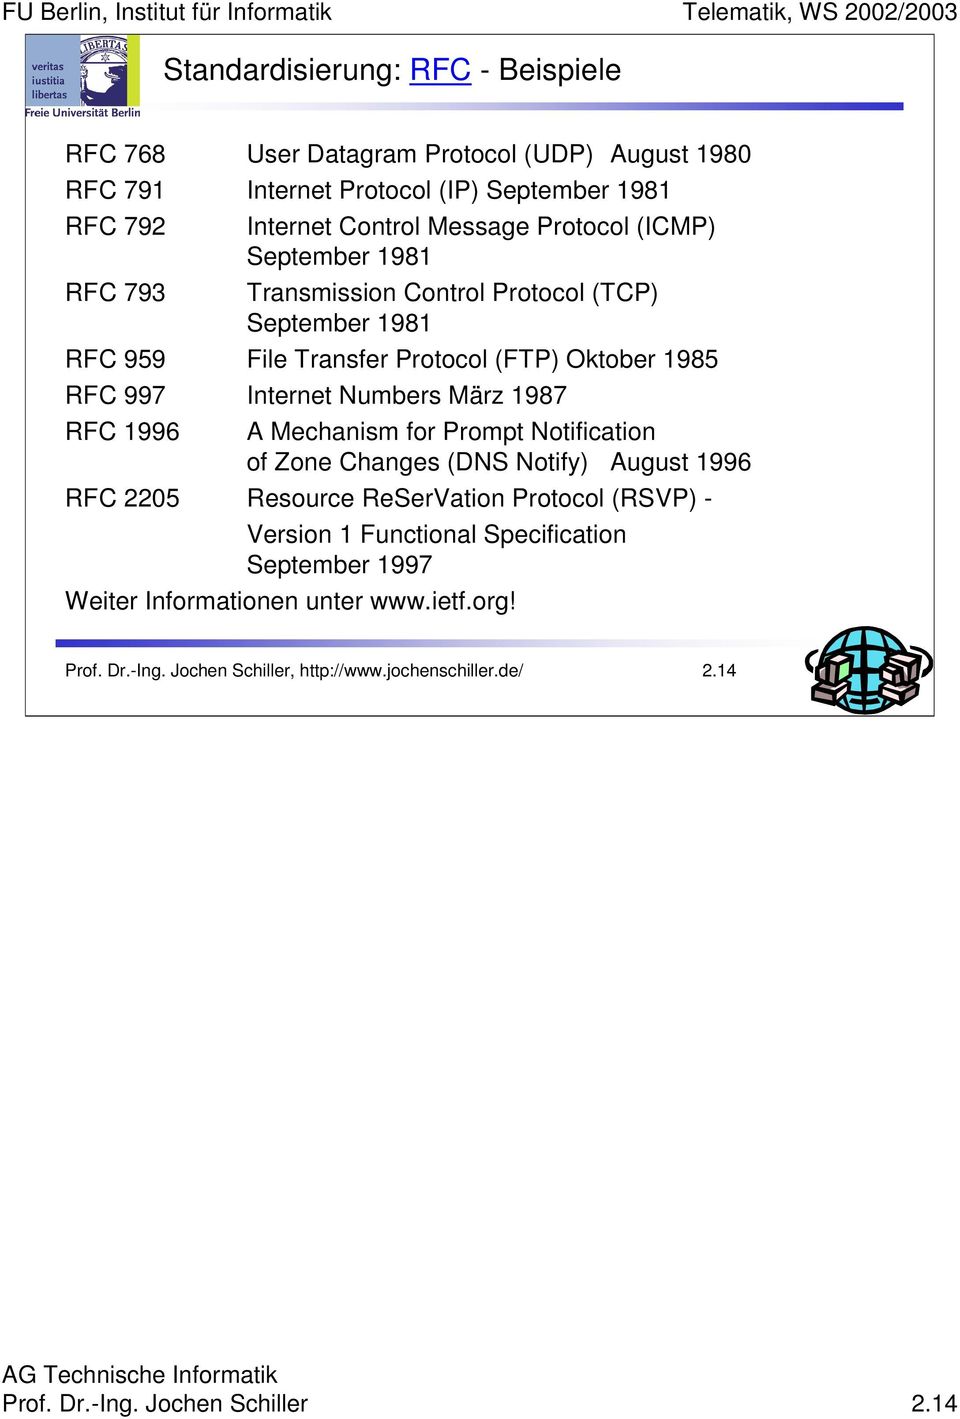 März 1987 RFC 1996 A Mechanism for Prompt Notification of Zone Changes (DNS Notify) August 1996 RFC 2205 Resource ReSerVation Protocol (RSVP) - Version 1 Functional